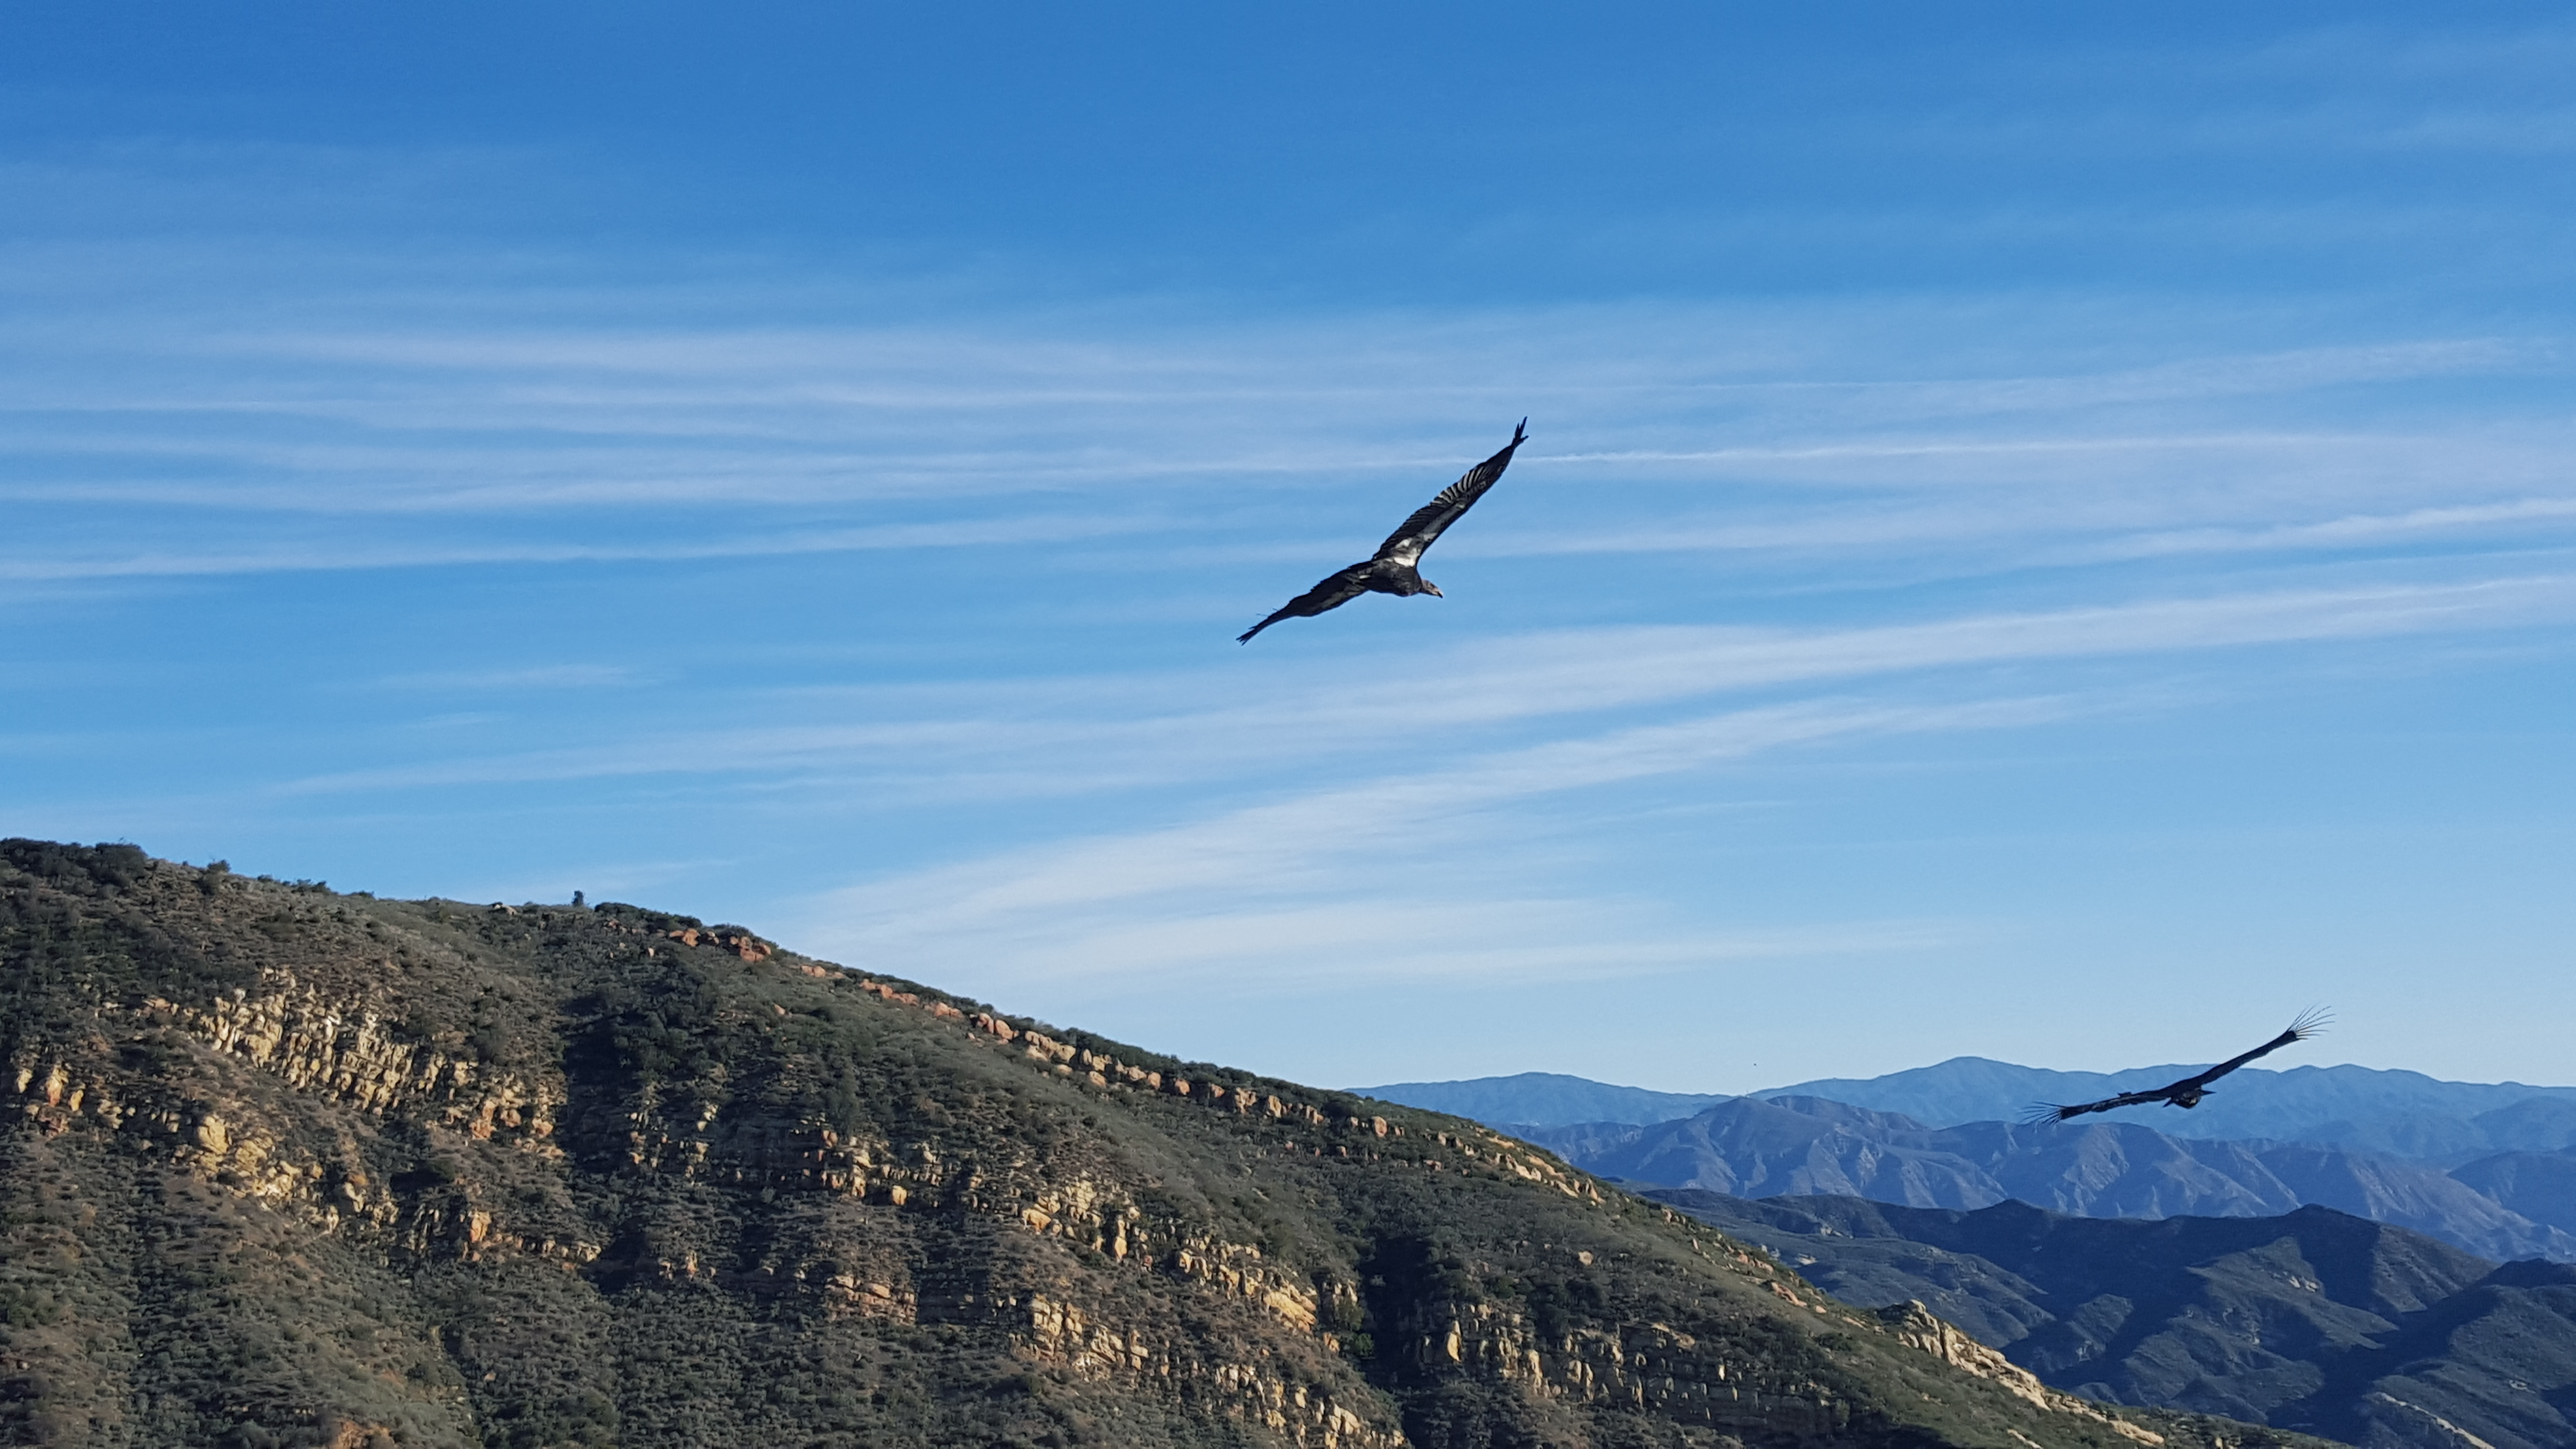 Two California condors soar in front of a blue sky above a rugged canyon ridge